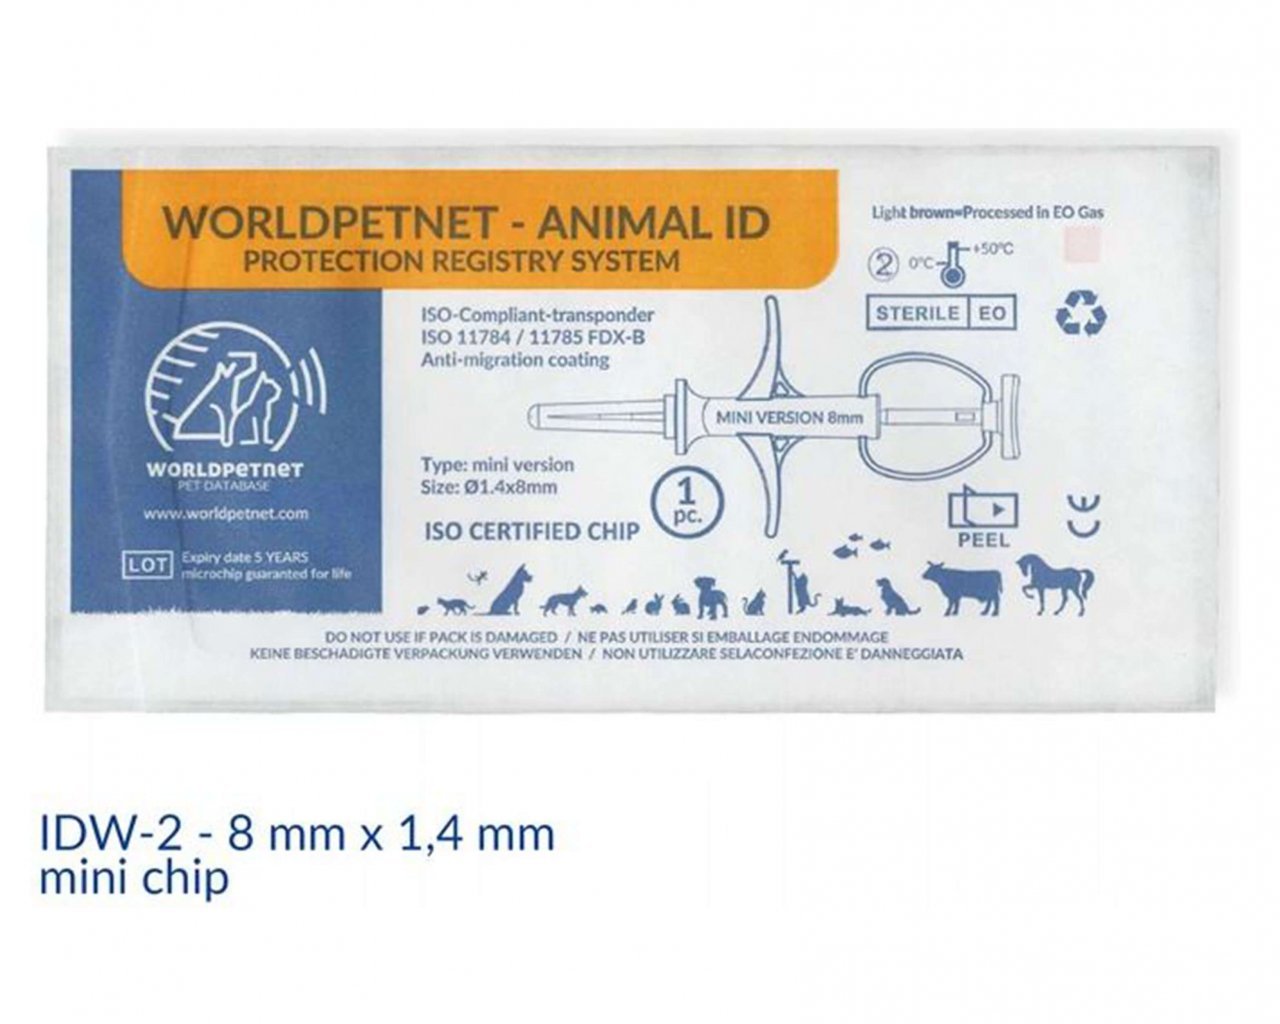 PET MICROCHIP FOR ANIMAL IDW-2 (CODE 900) 8MMX1.4MM MINI - microchip for dog, animals, pet identification reader #13